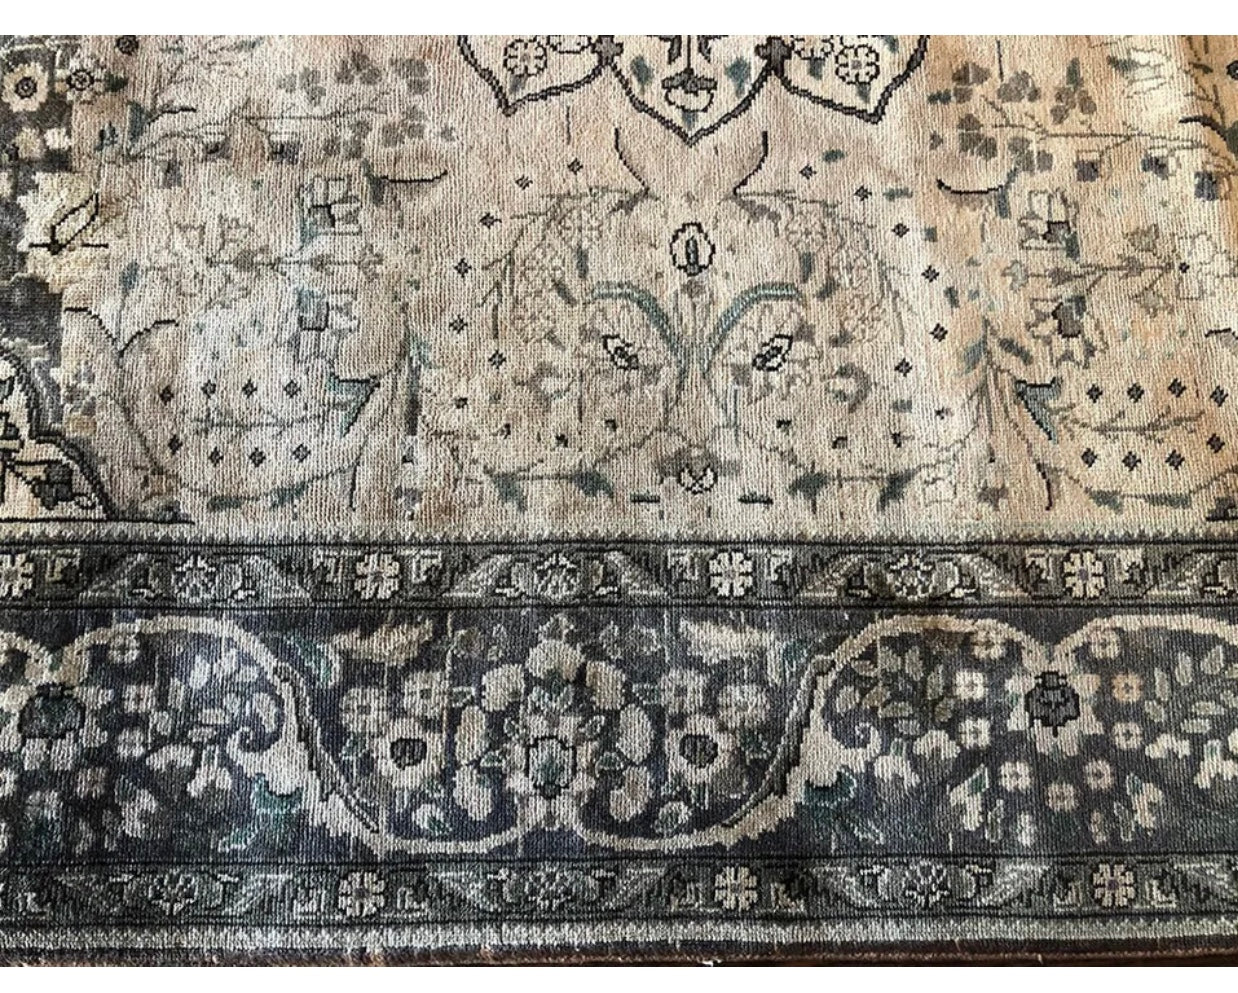 Antique Washed Out Persian Tabriz Rug